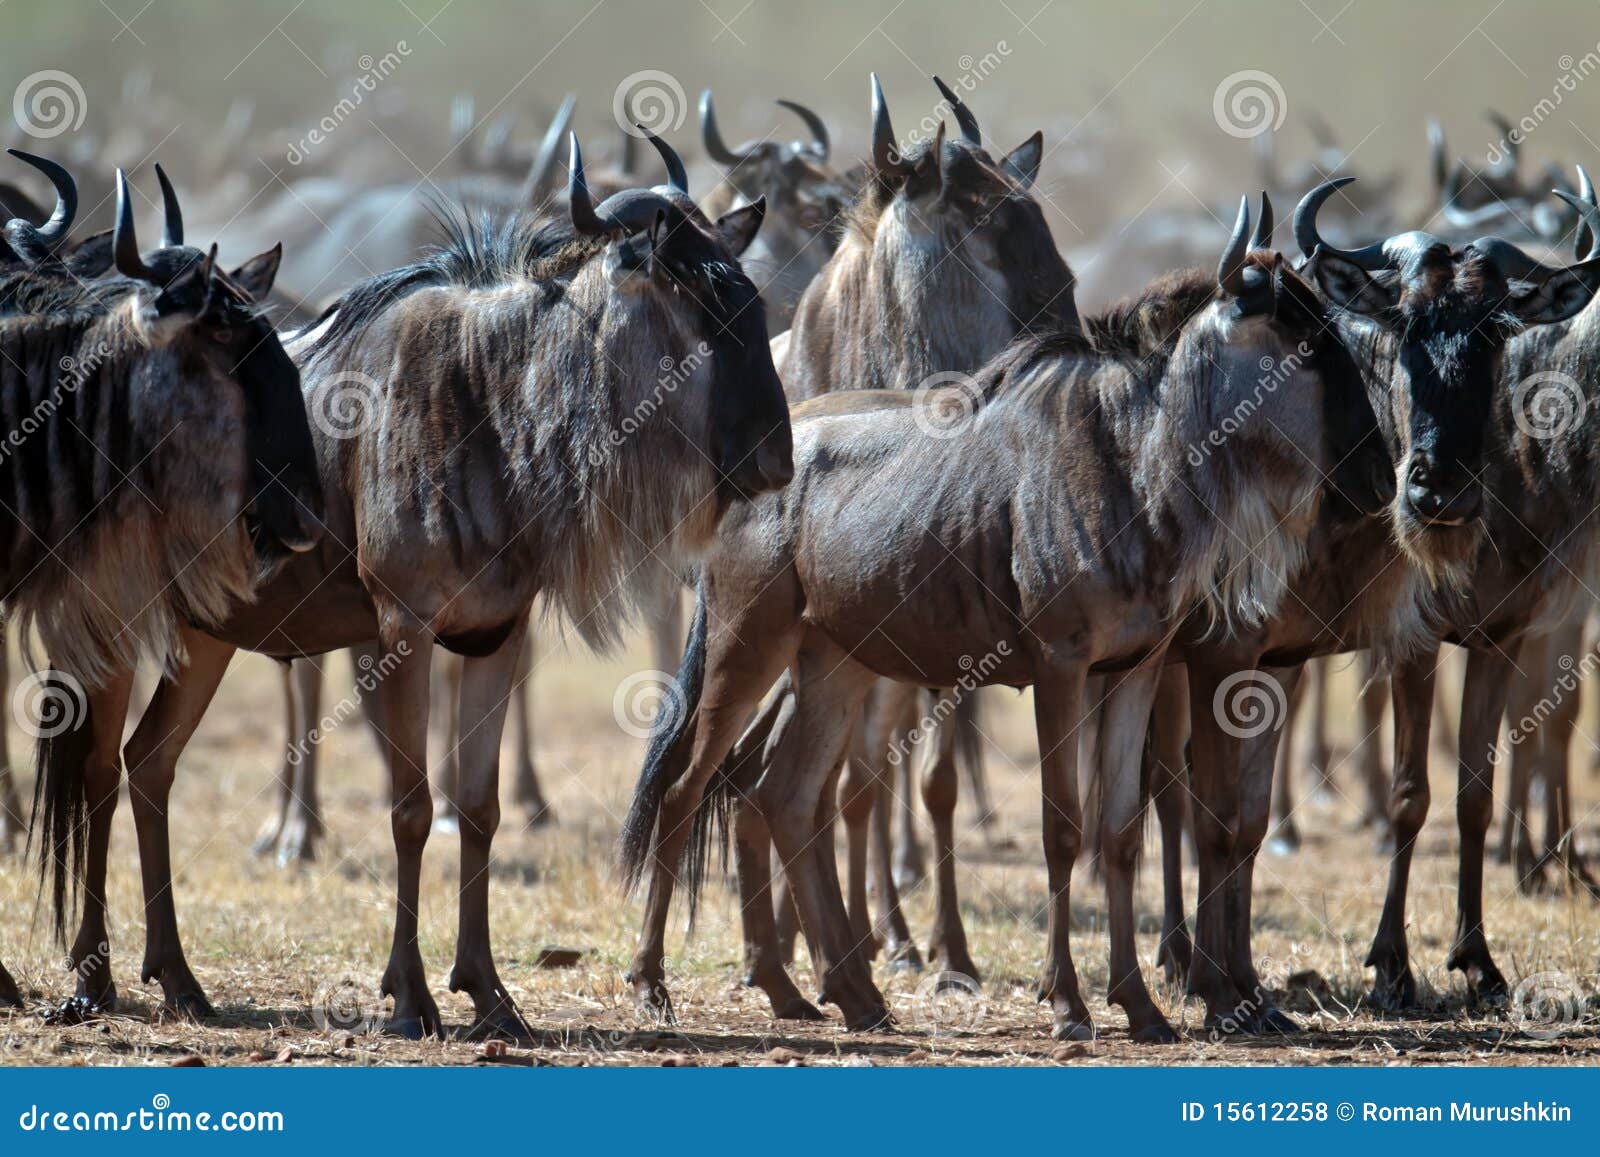 wildebeests are collected in a large herd